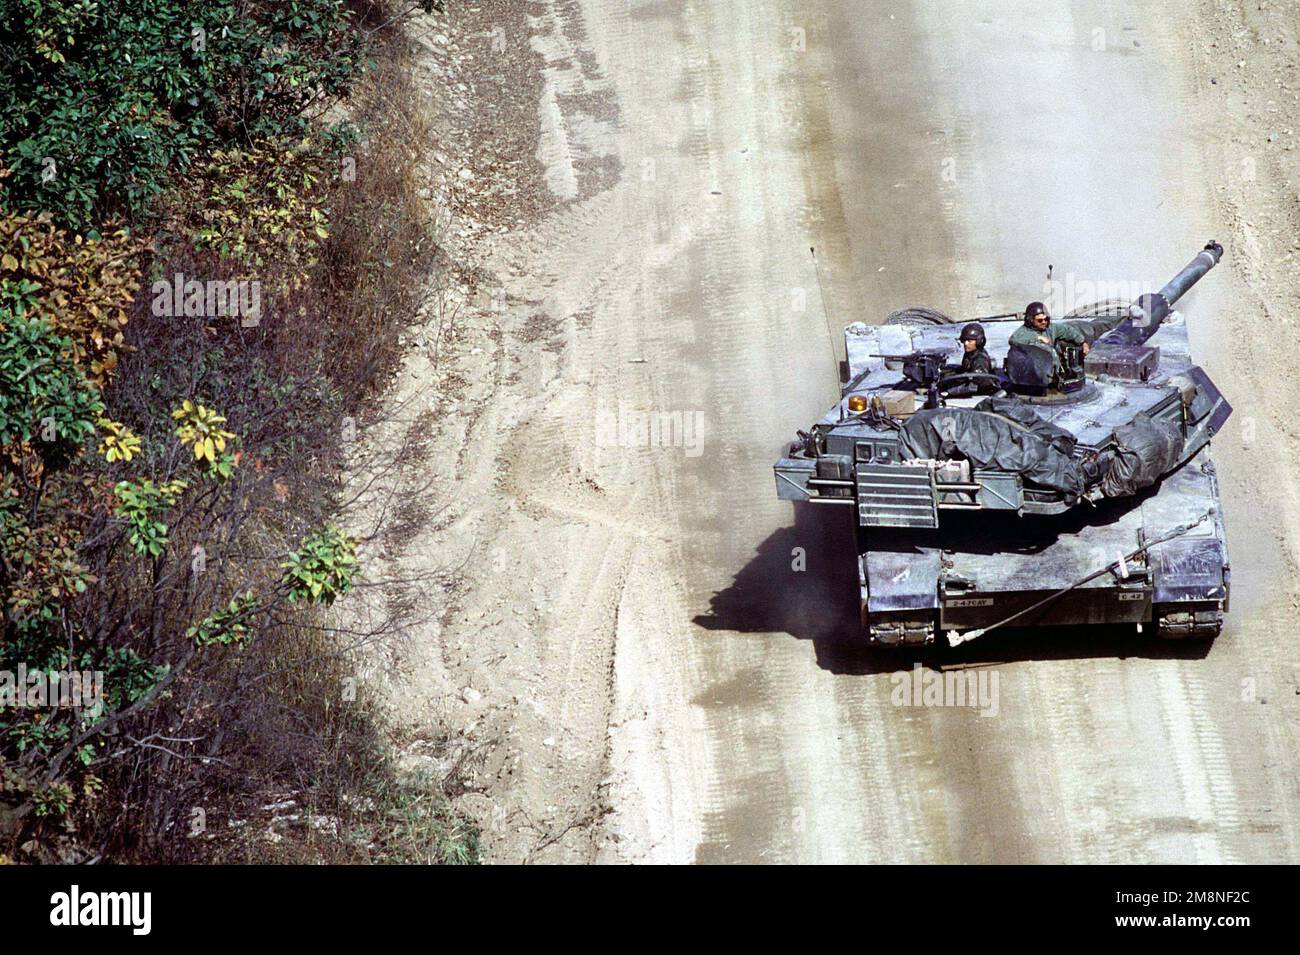 A US Army M1-A1 Abrams tank, from C Troop of the 4th Squadron, 7th Cavalry Regiment drives to the live fire training range at the Korea Training Center, Republic of Korea on Oct. 25, 1998. The center is manned throughout the year and various armored units rotate through training scenarios to meet yearly live gunnery training requirements. Subject Operation/Series: KOREA CD Base: Korea Training Center Country: Republic Of Korea (KOR) Stock Photo